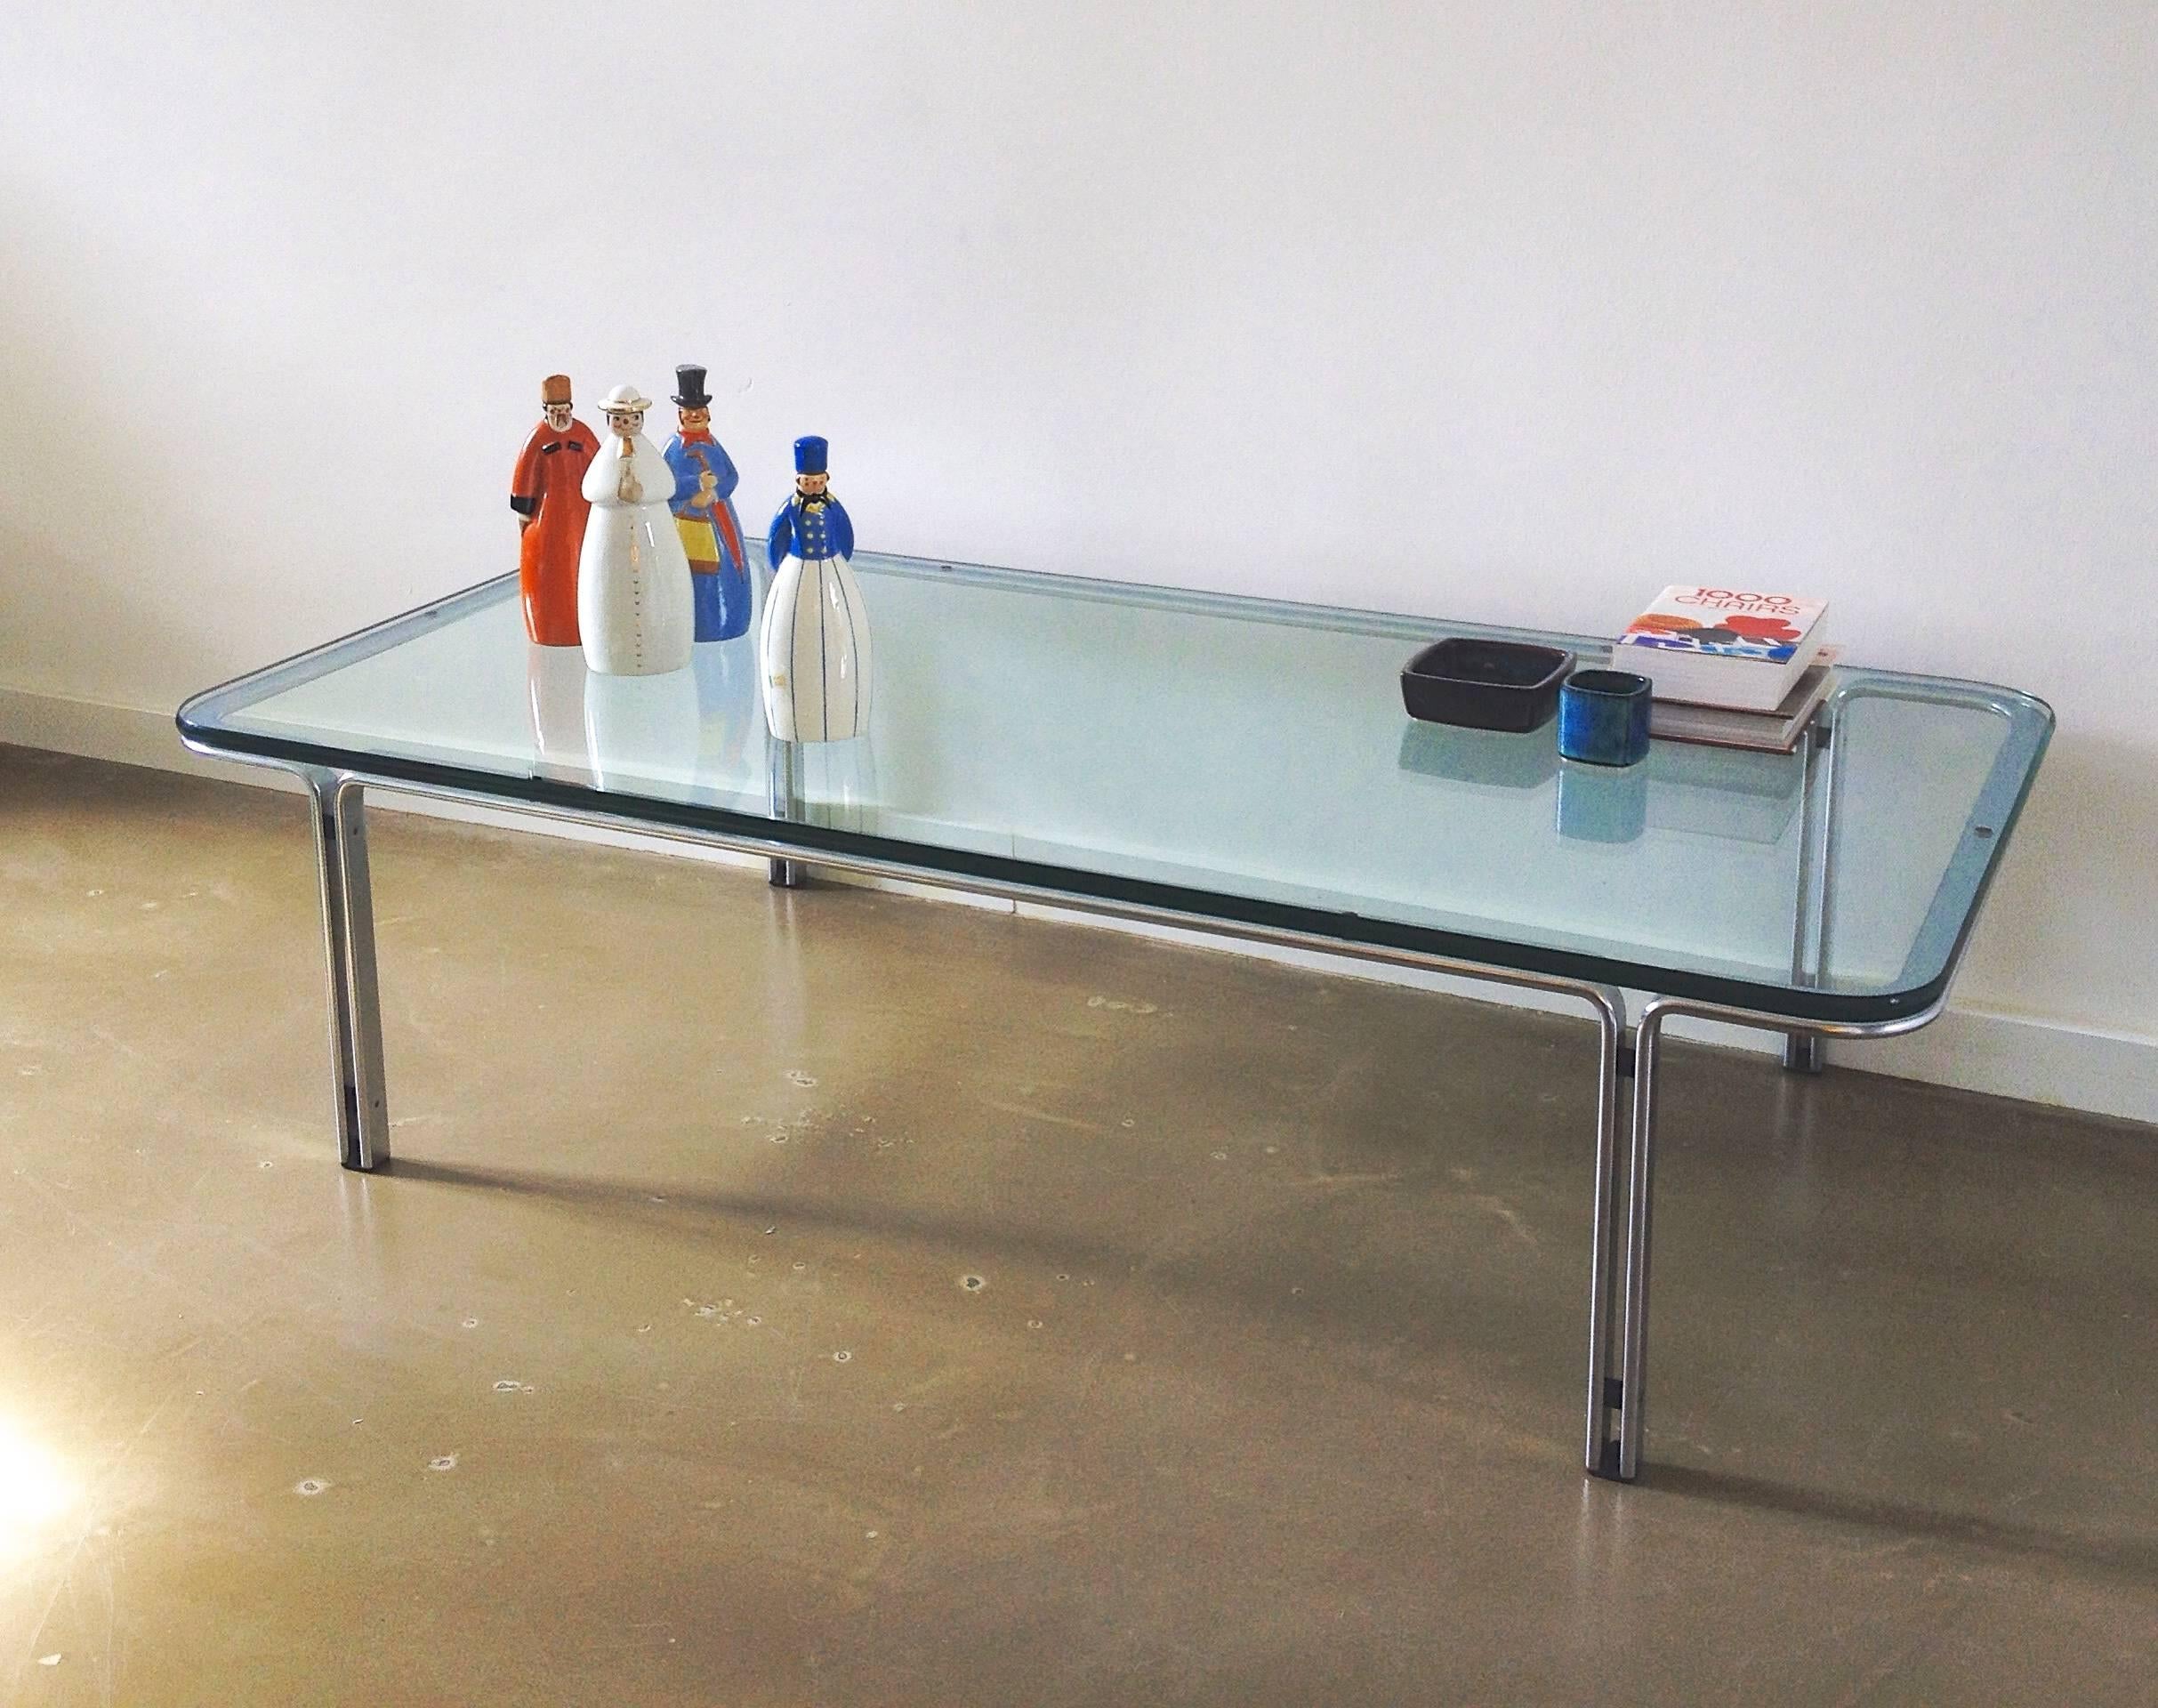 This T112 coffee table was designed during the 1970s by Horst Bruning and manufactured by Kill International in Germany. It features a structure made from chrome-plated steel as well as a thick glass tabletop.